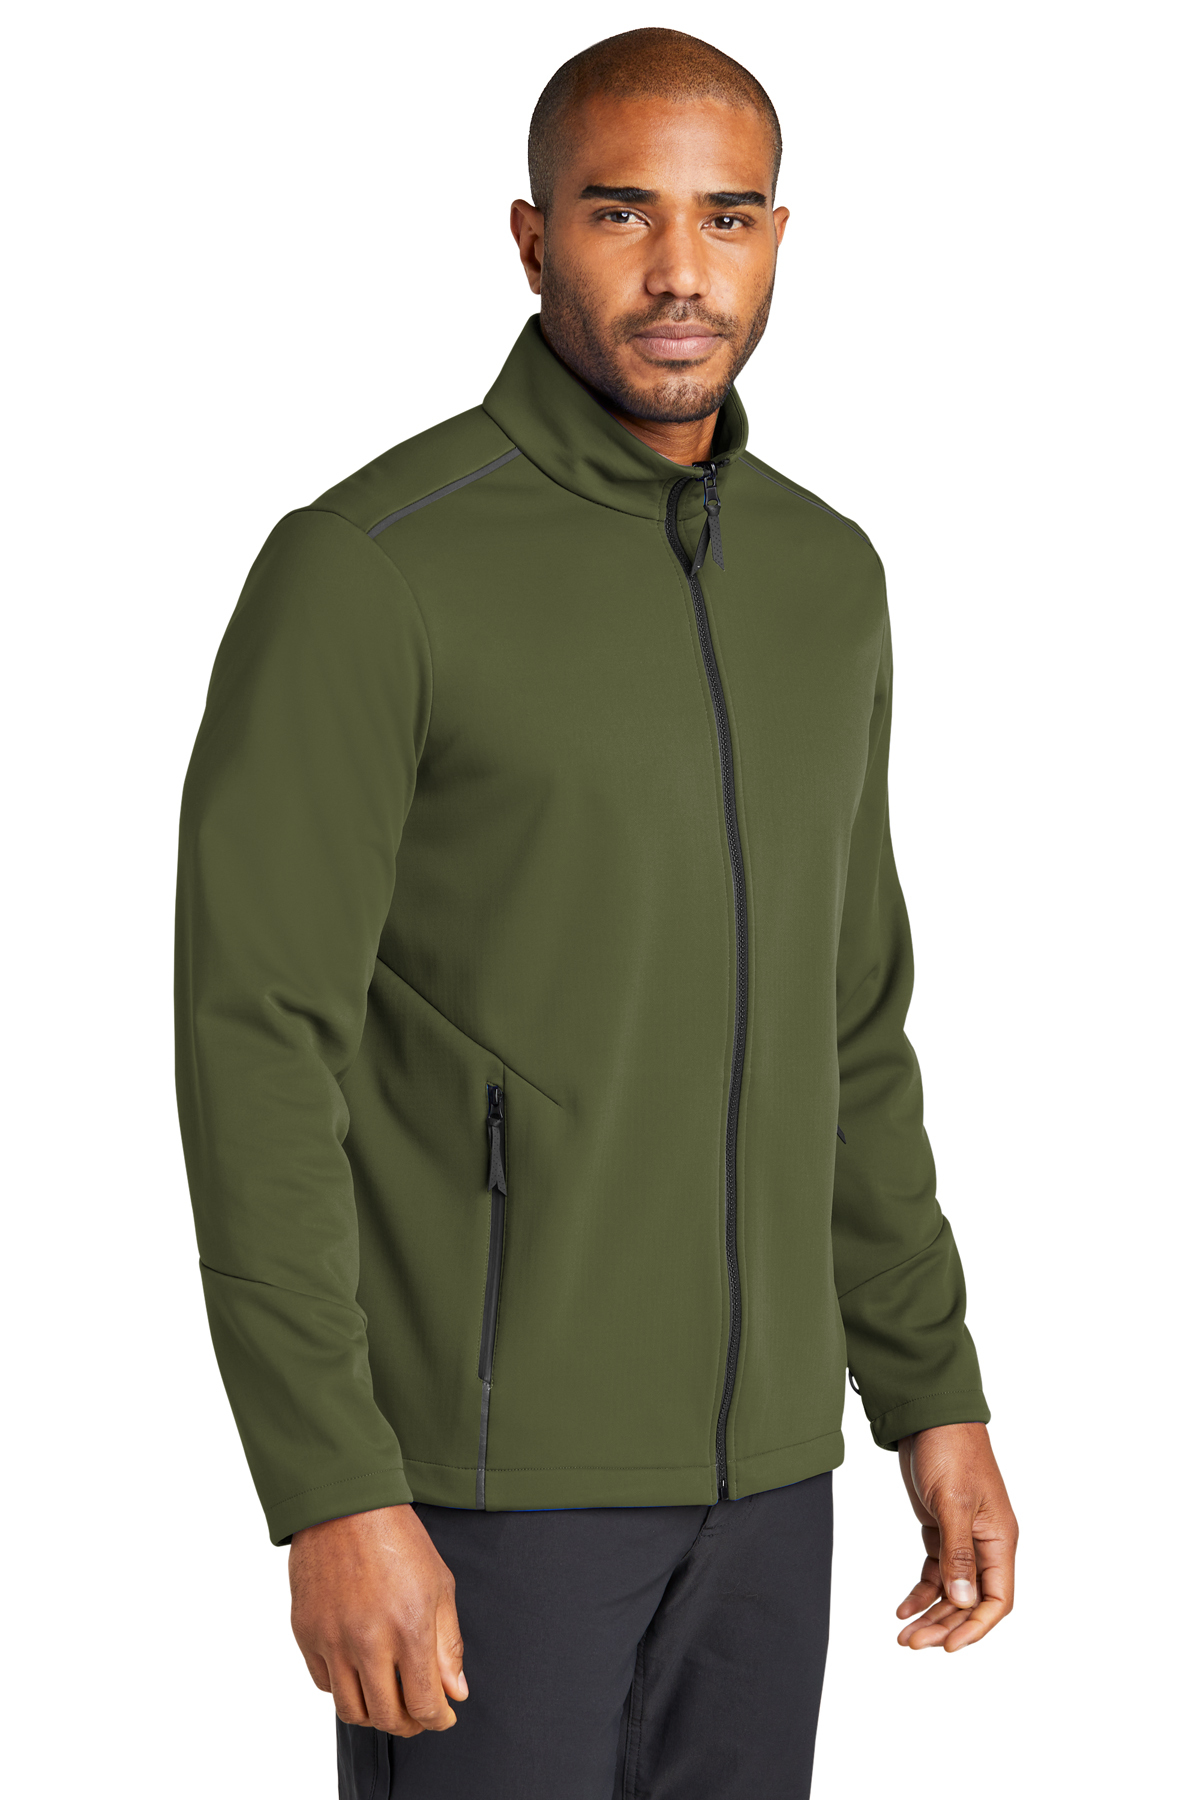 Port Authority Collective Tech Soft Shell Jacket | Product | Company ...